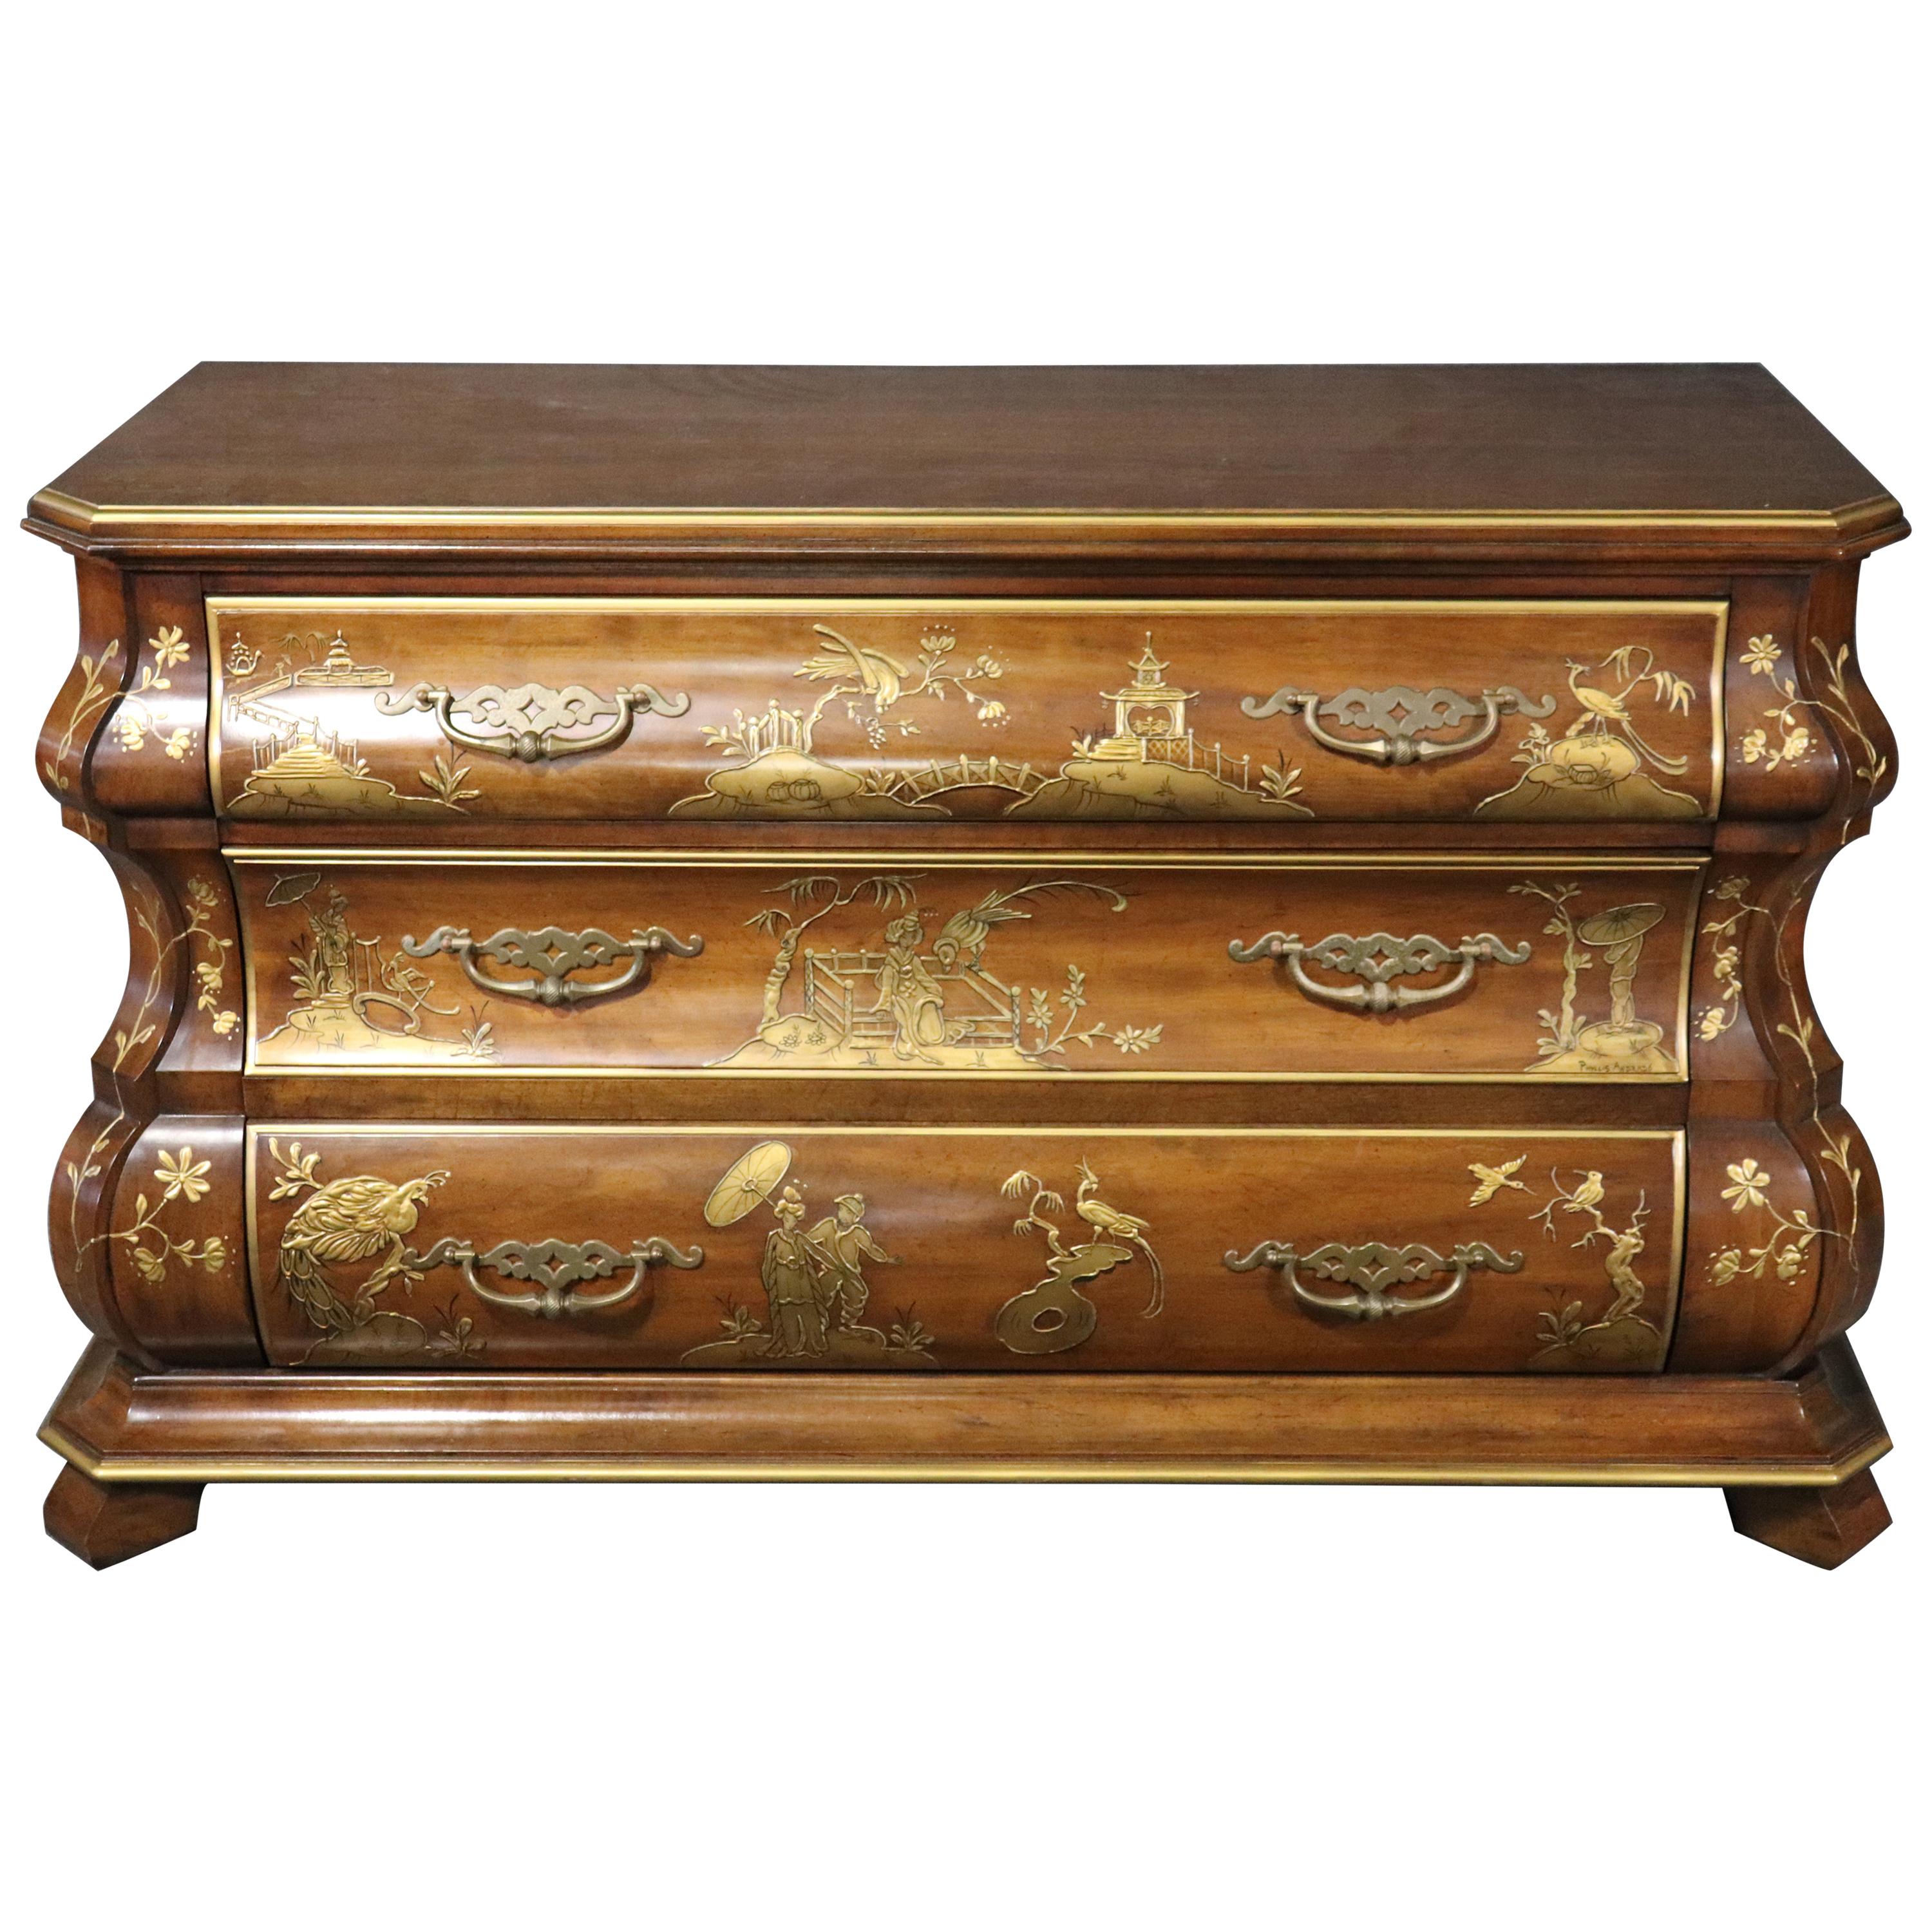 Hand Painted Walnut Chinoiserie Dutch Baroque Style Commode Foyer Cabinet